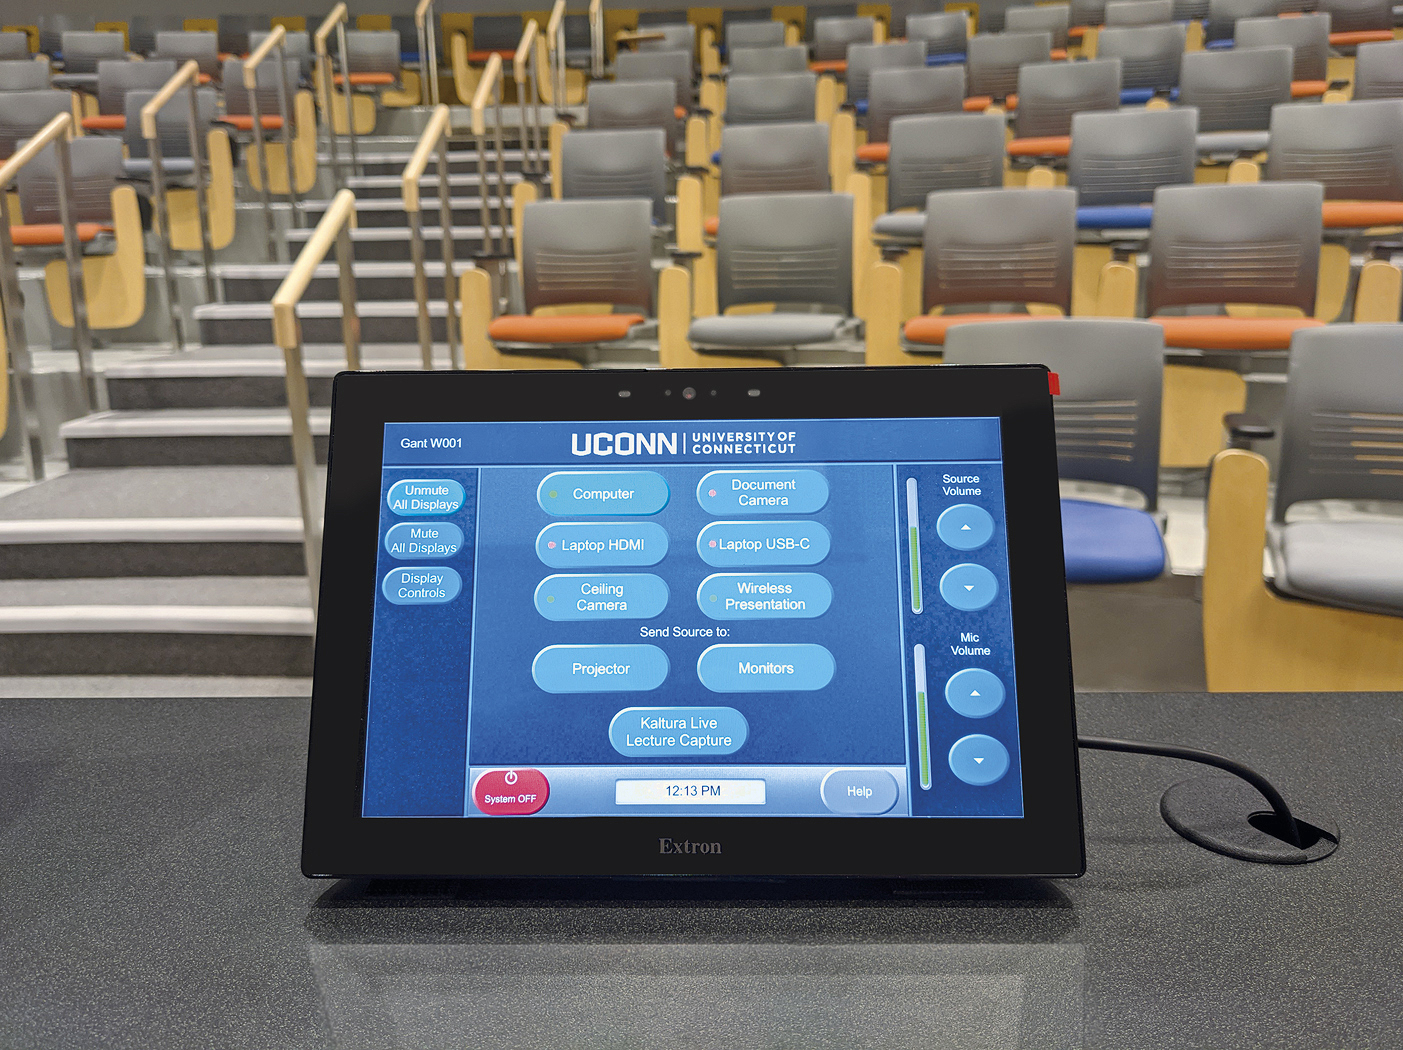 Click on the video link in the sidebar to watch a video demonstration of UConn’s AV user interface.